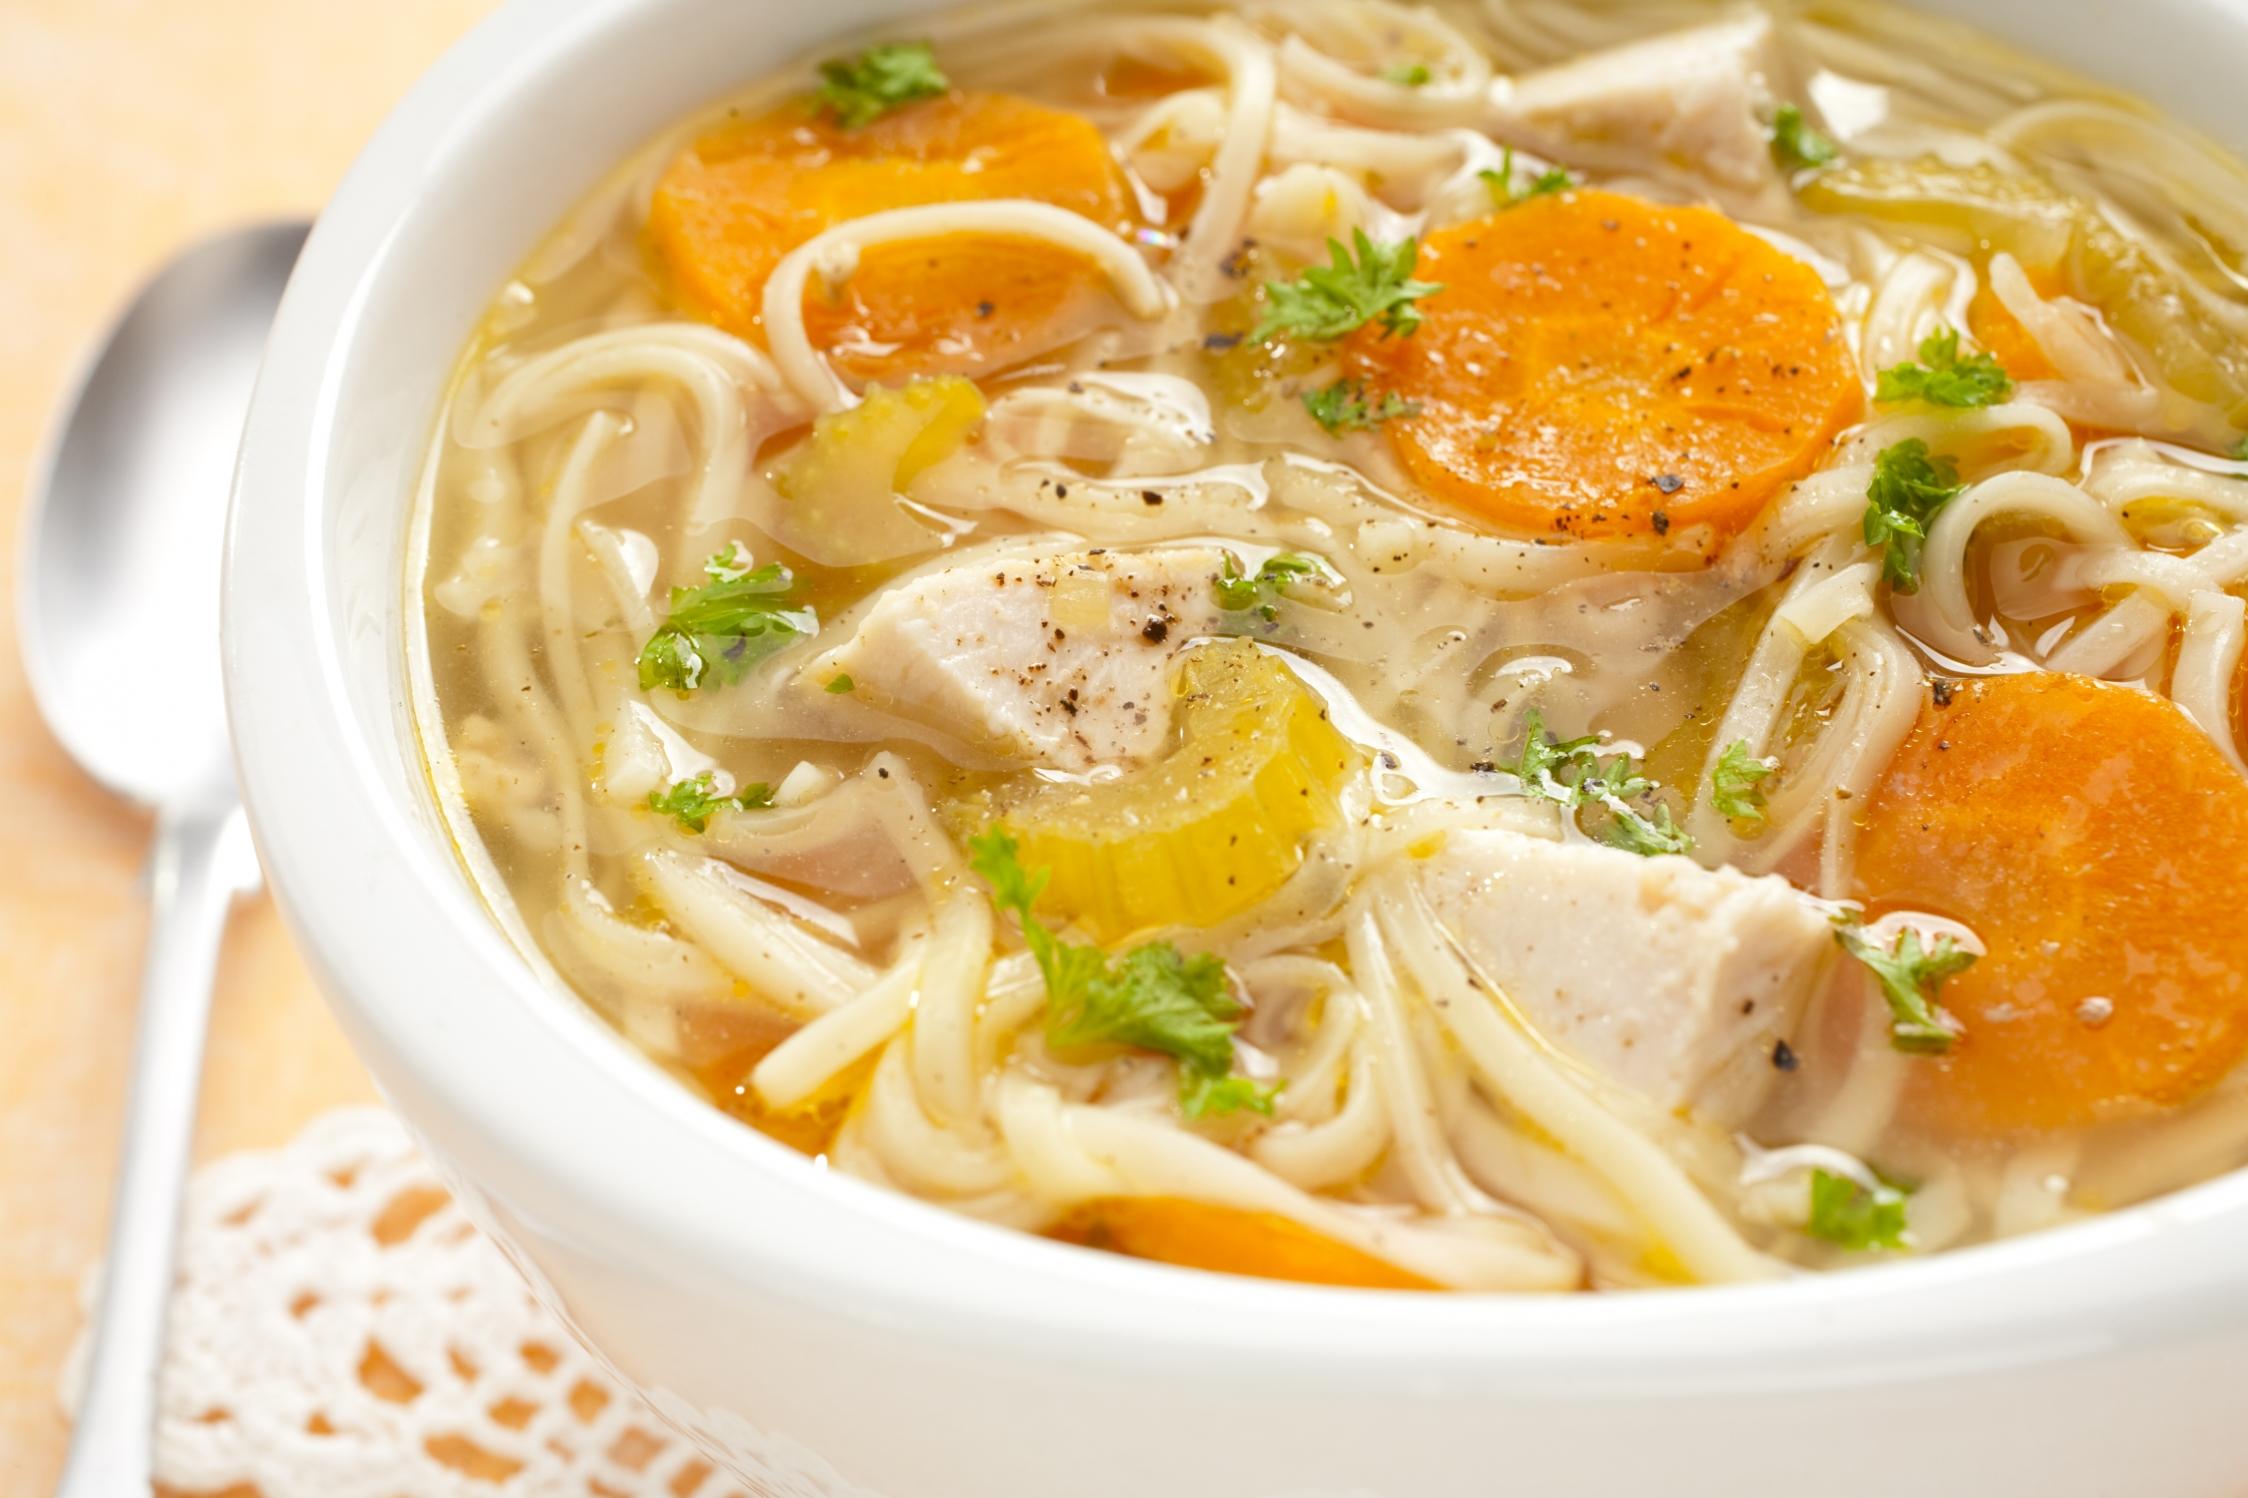  Keep things light with this dairy-free and gluten-free chicken soup.